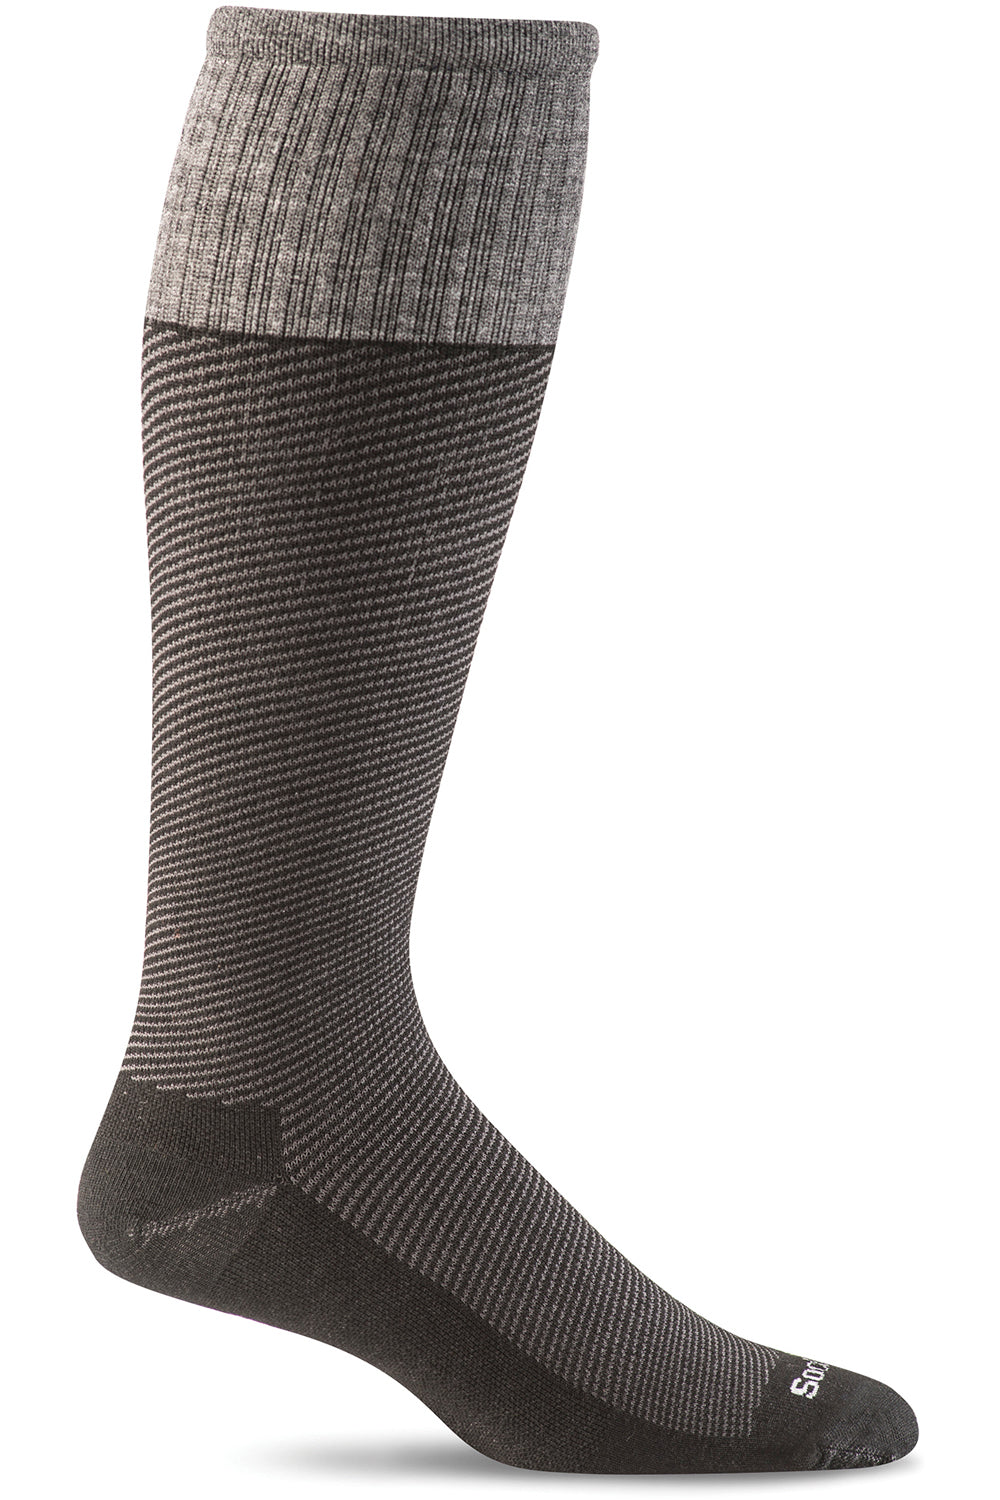 Sockwell Men's Bart Compression Sock in Black color from the side